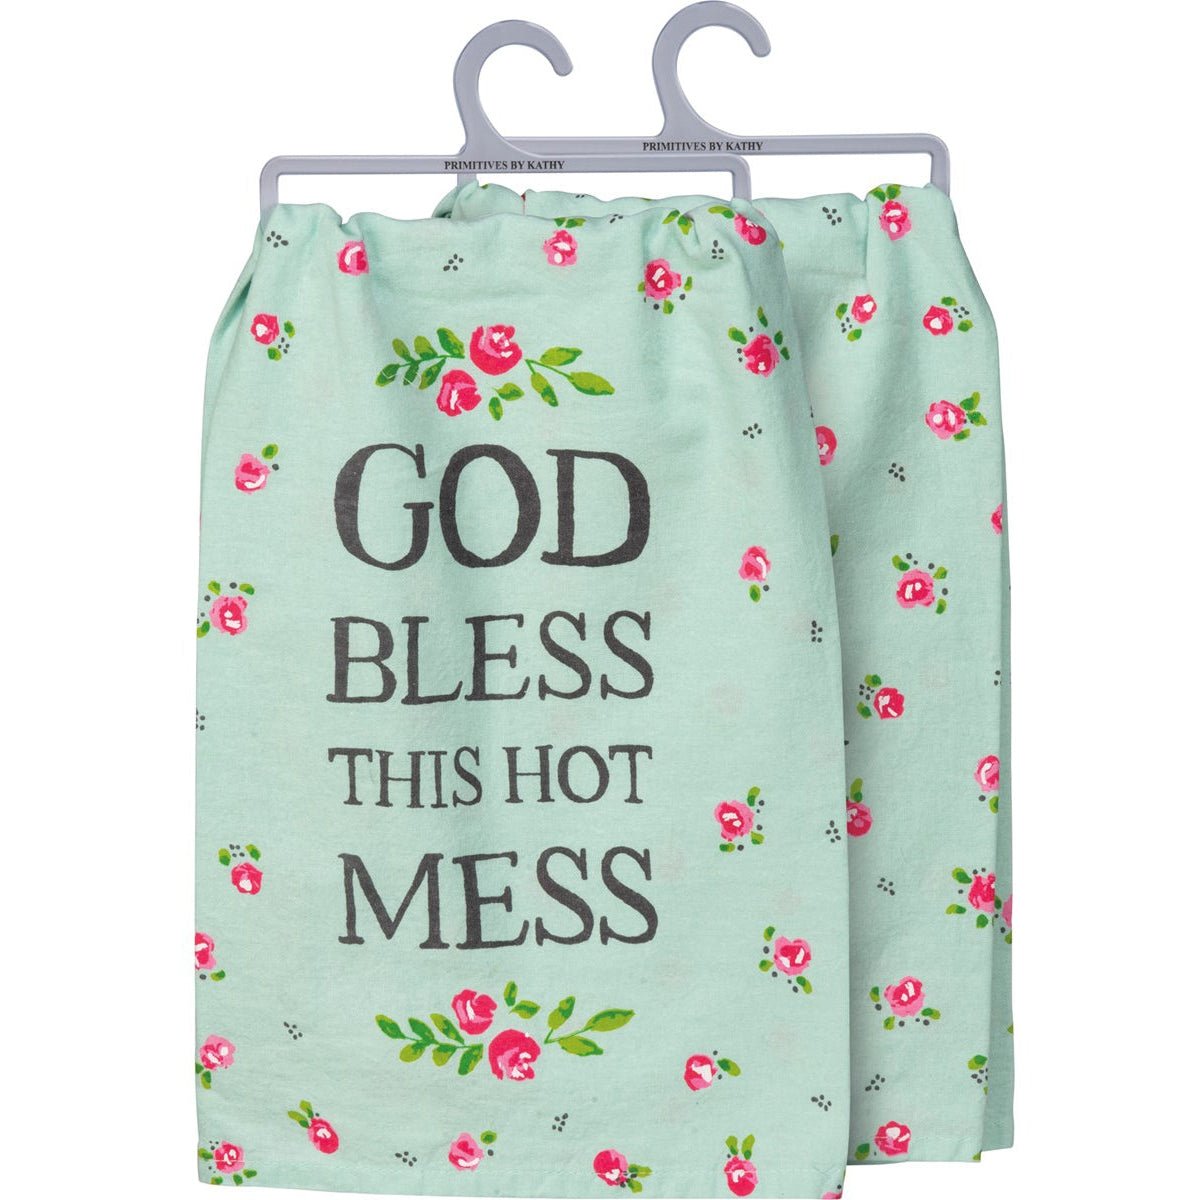 God Bless This Hot Mess Bright Multicolored Funny Snarky Dish Cloth Towel / Novelty Silly Tea Towels / Cute Hilarious Farmhouse Kitchen Hand Towel